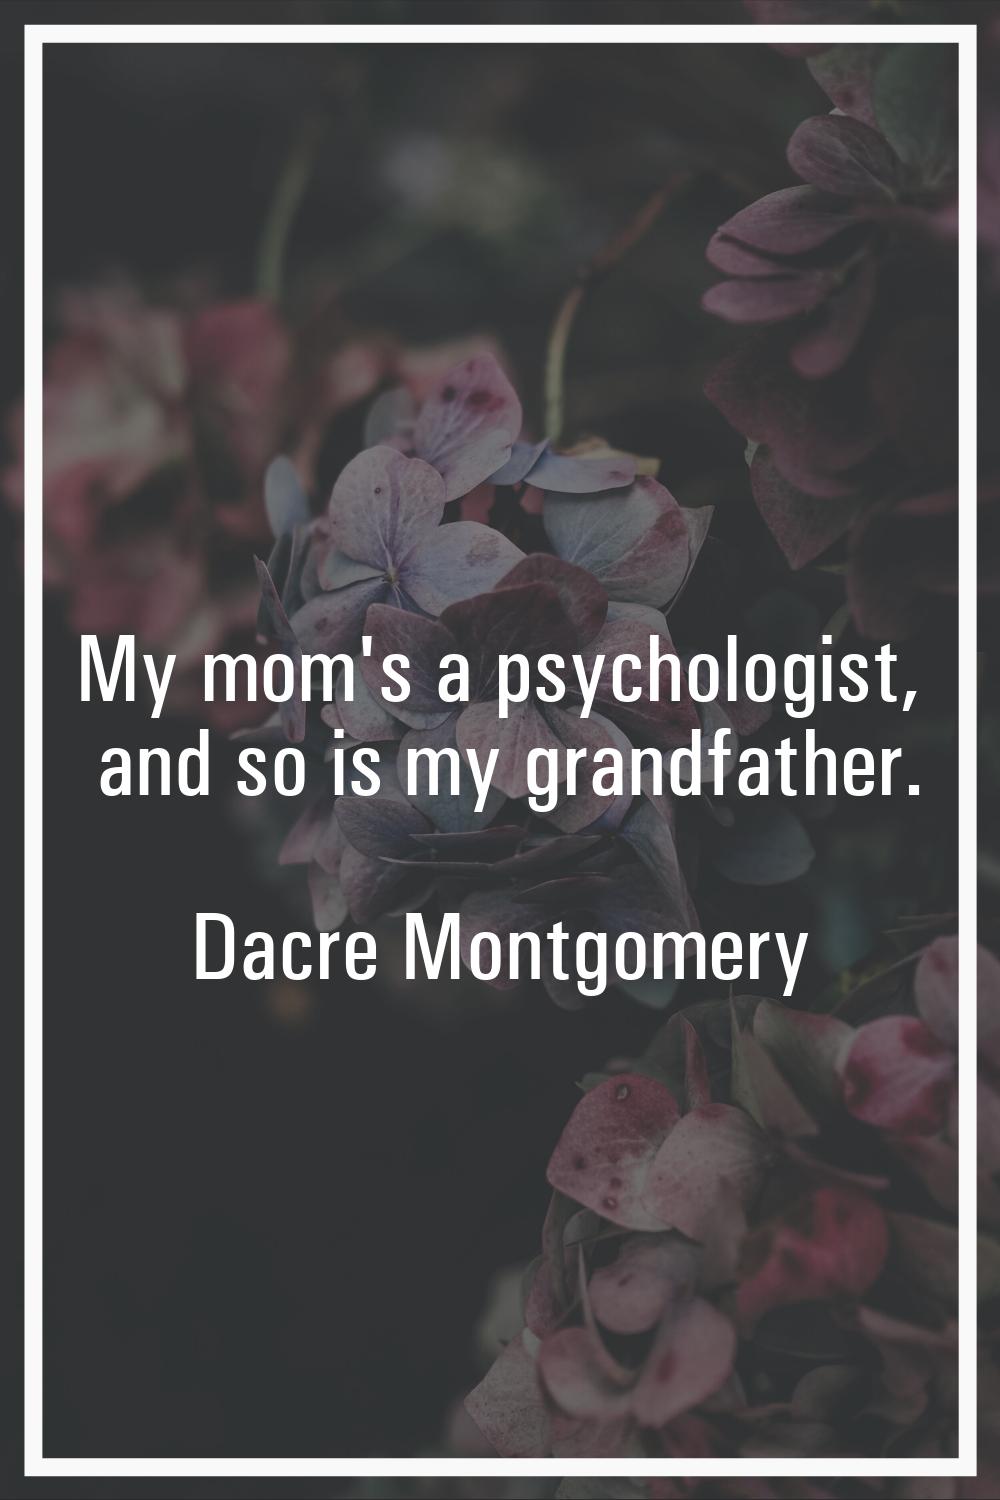 My mom's a psychologist, and so is my grandfather.